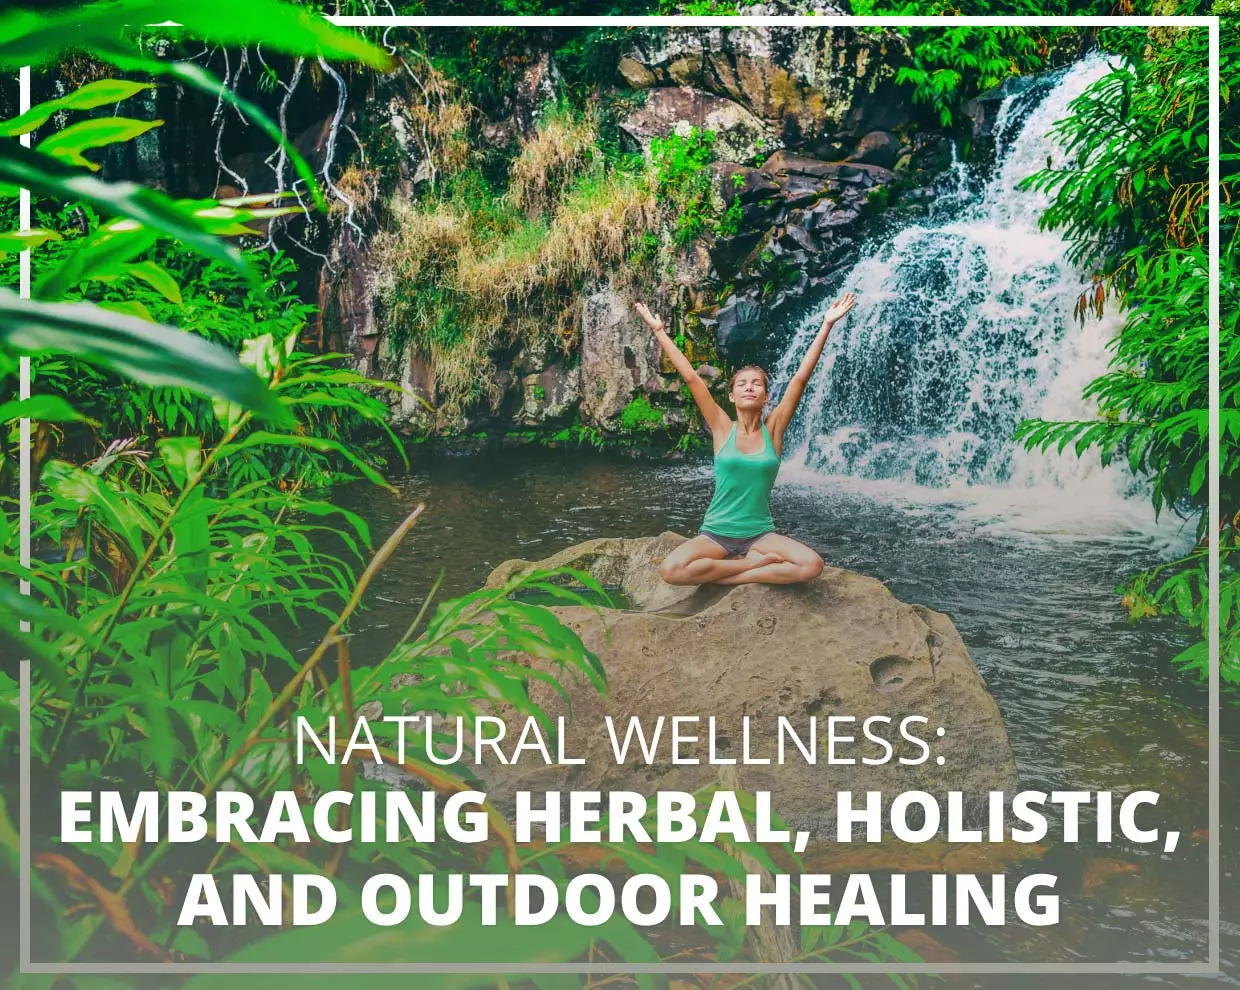 Natural Wellness: Embracing Herbal, Holistic, and Outdoor Healing